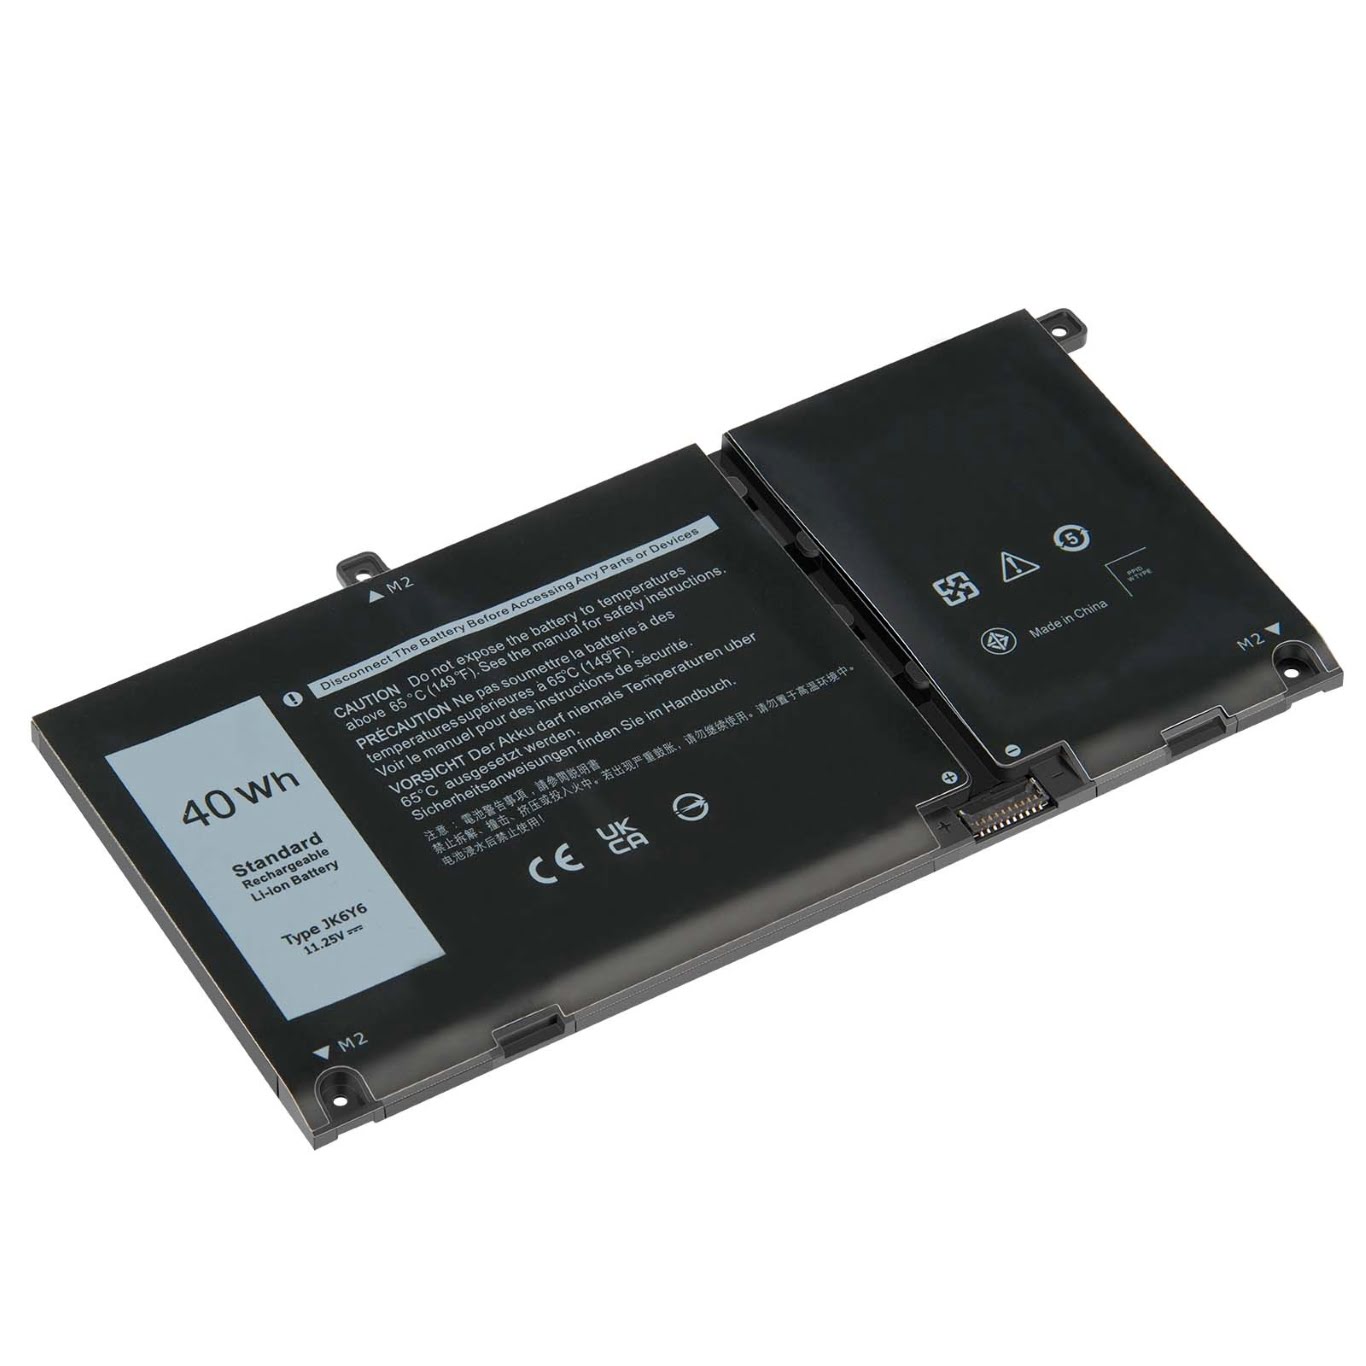 07T8CD, 09077G replacement Laptop Battery for Dell Inspiron 5300, Inspiron 5400 2-in-1 Series, 3 cells, 11.25V, 40wh